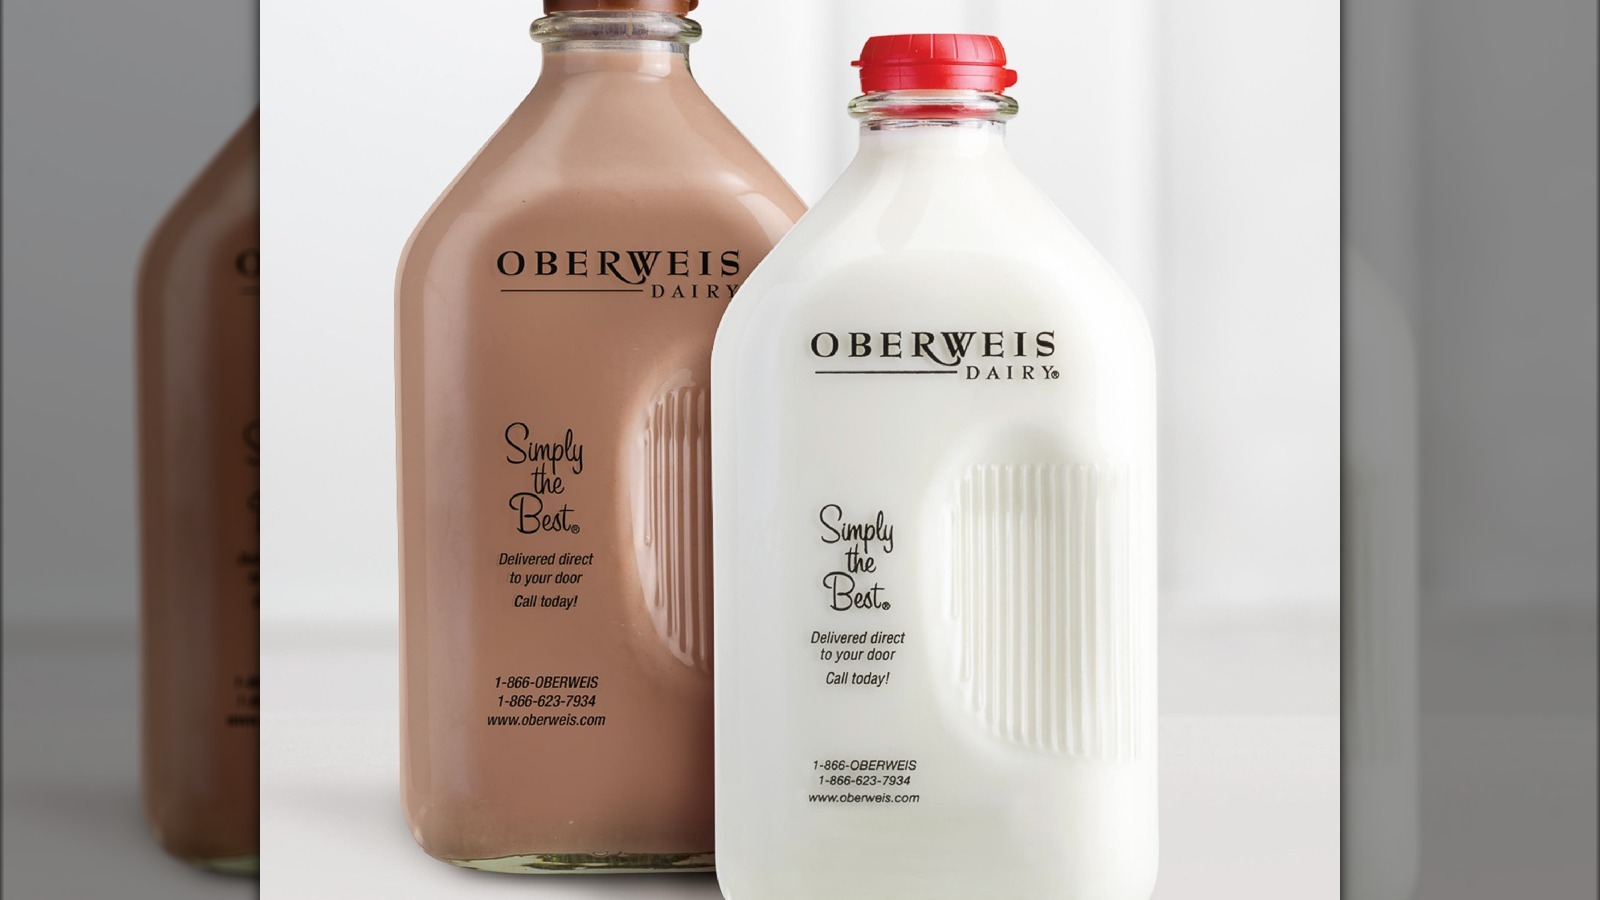 https://www.mashed.com/img/gallery/the-untold-truth-of-oberweis-dairy/l-intro-1661446350.jpg